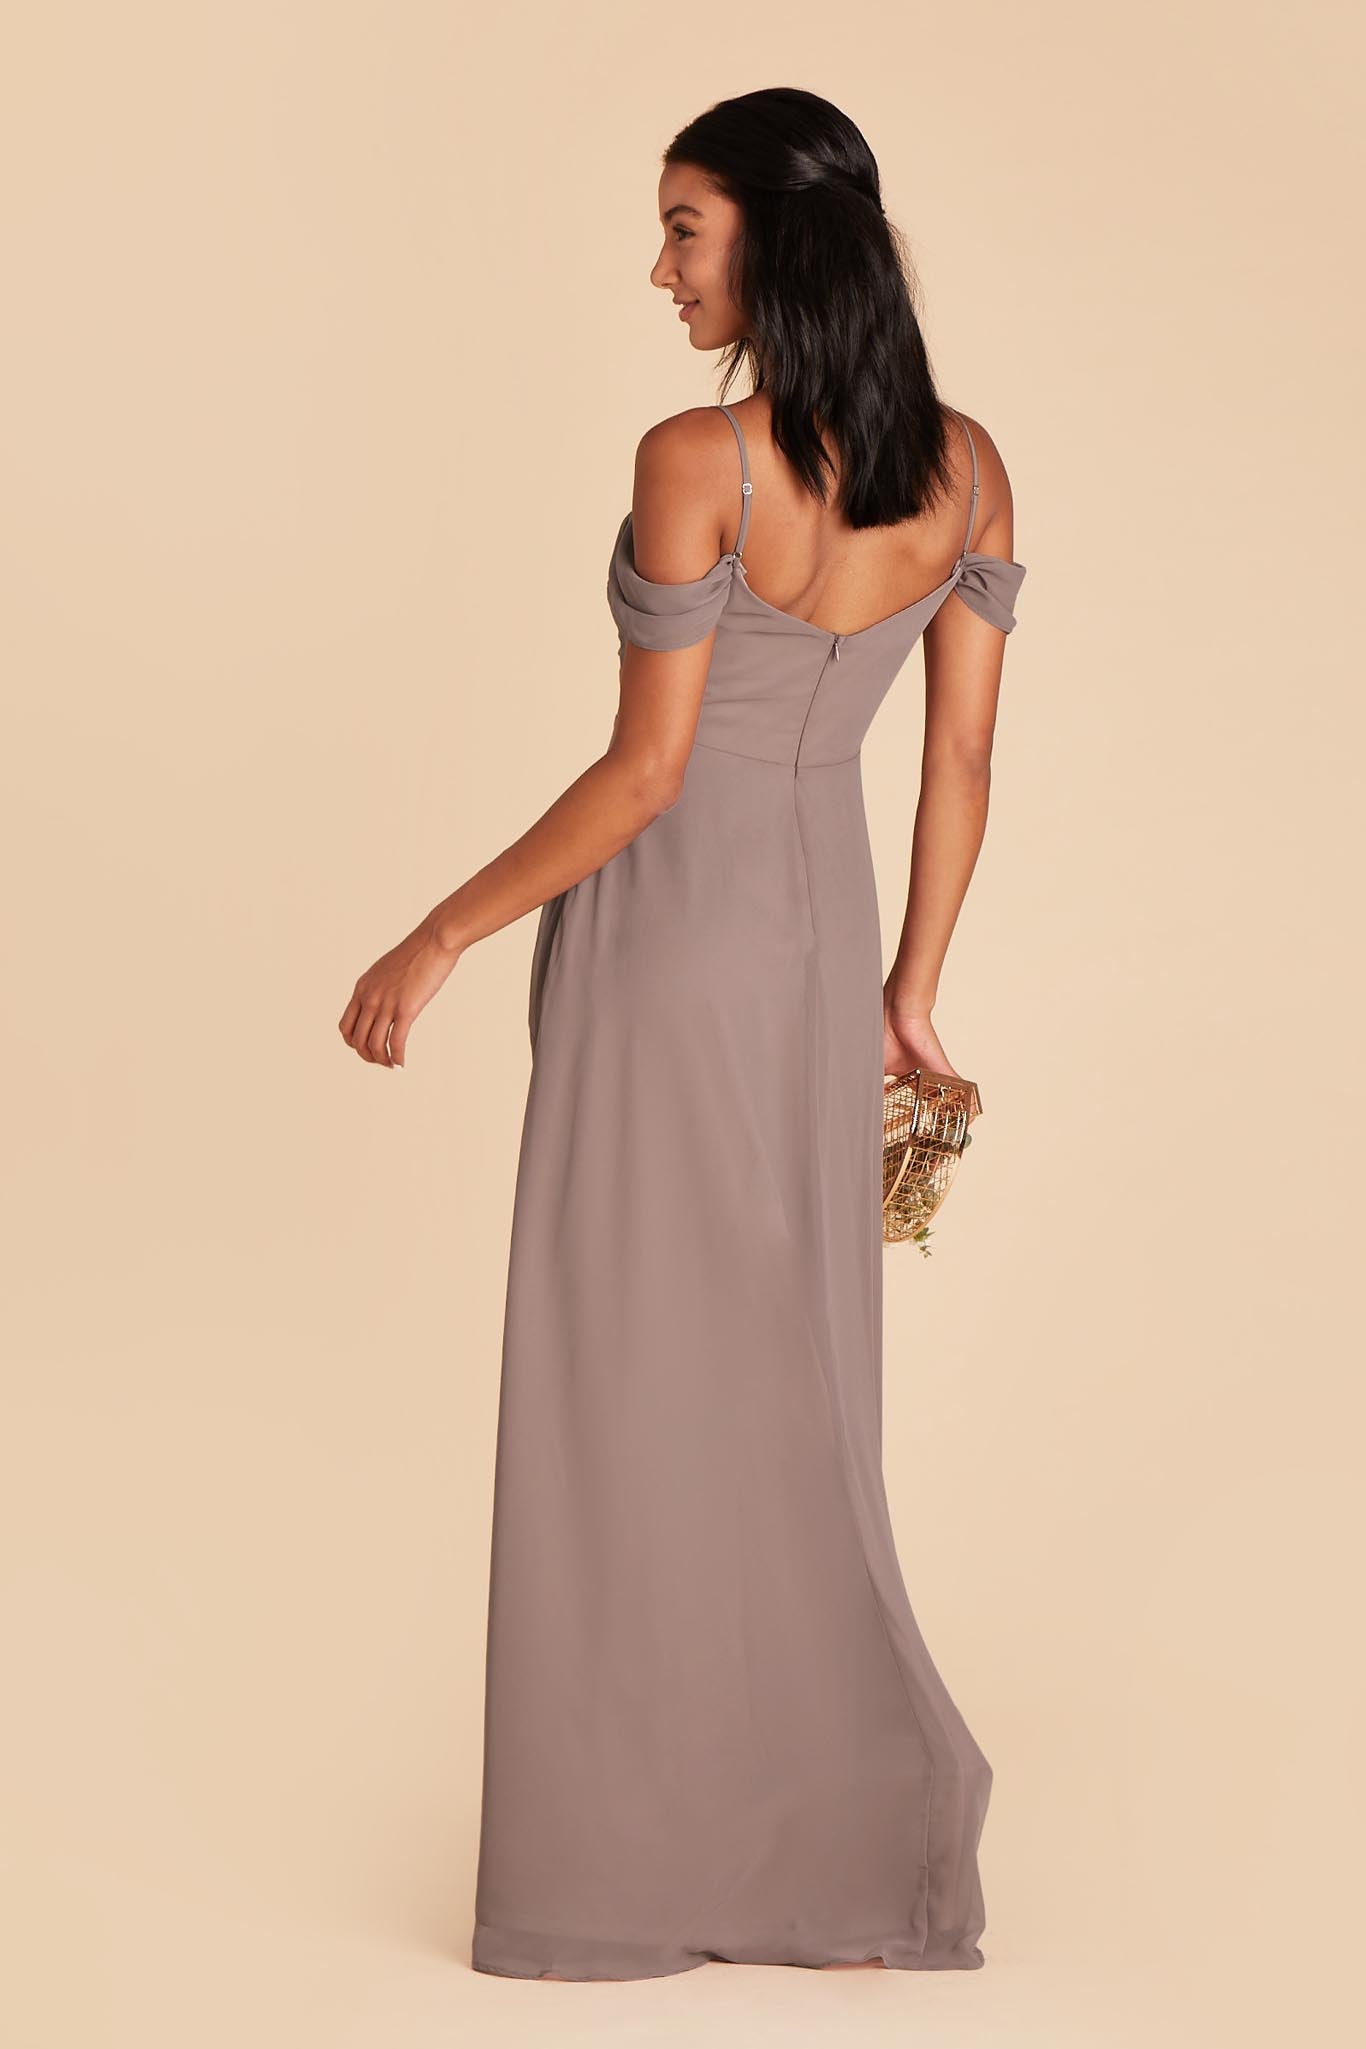 Toffee Devin Convertible Dress by Birdy Grey